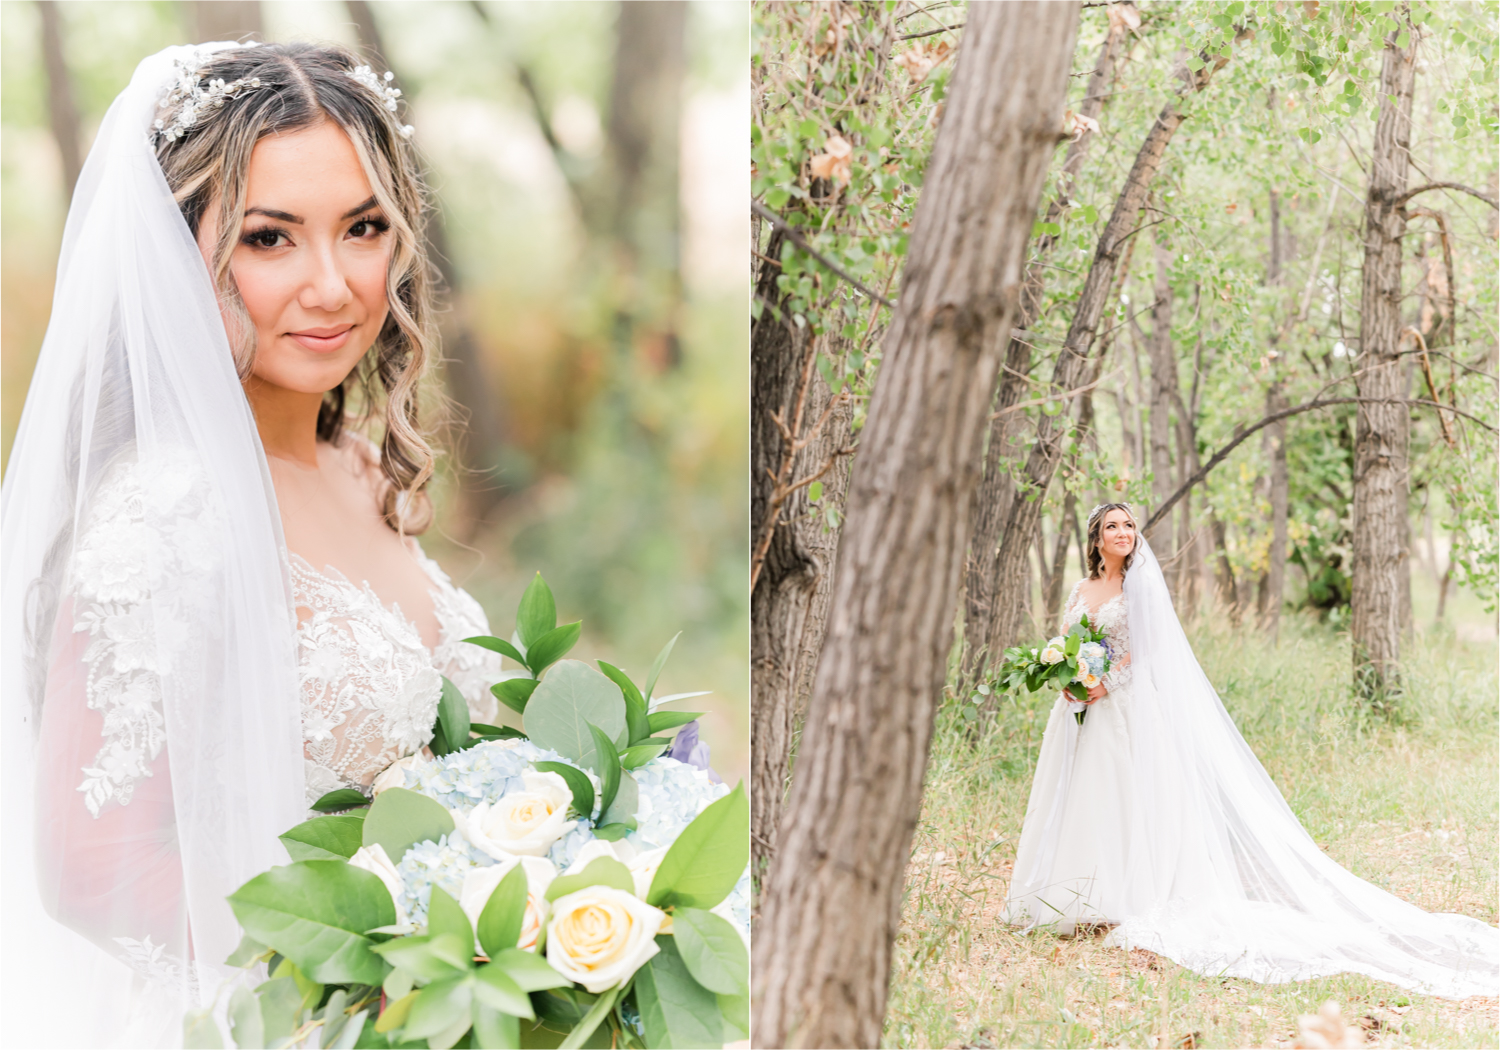 Romantic and Rustic Wedding at The Mill in Windsor | Britni Girard Photography | Colorado based wedding photography and videography team | Bride Portraits | Bride's Dress from Madeira Wedding in Kiev Ukraine | Portraits at Eastman Park